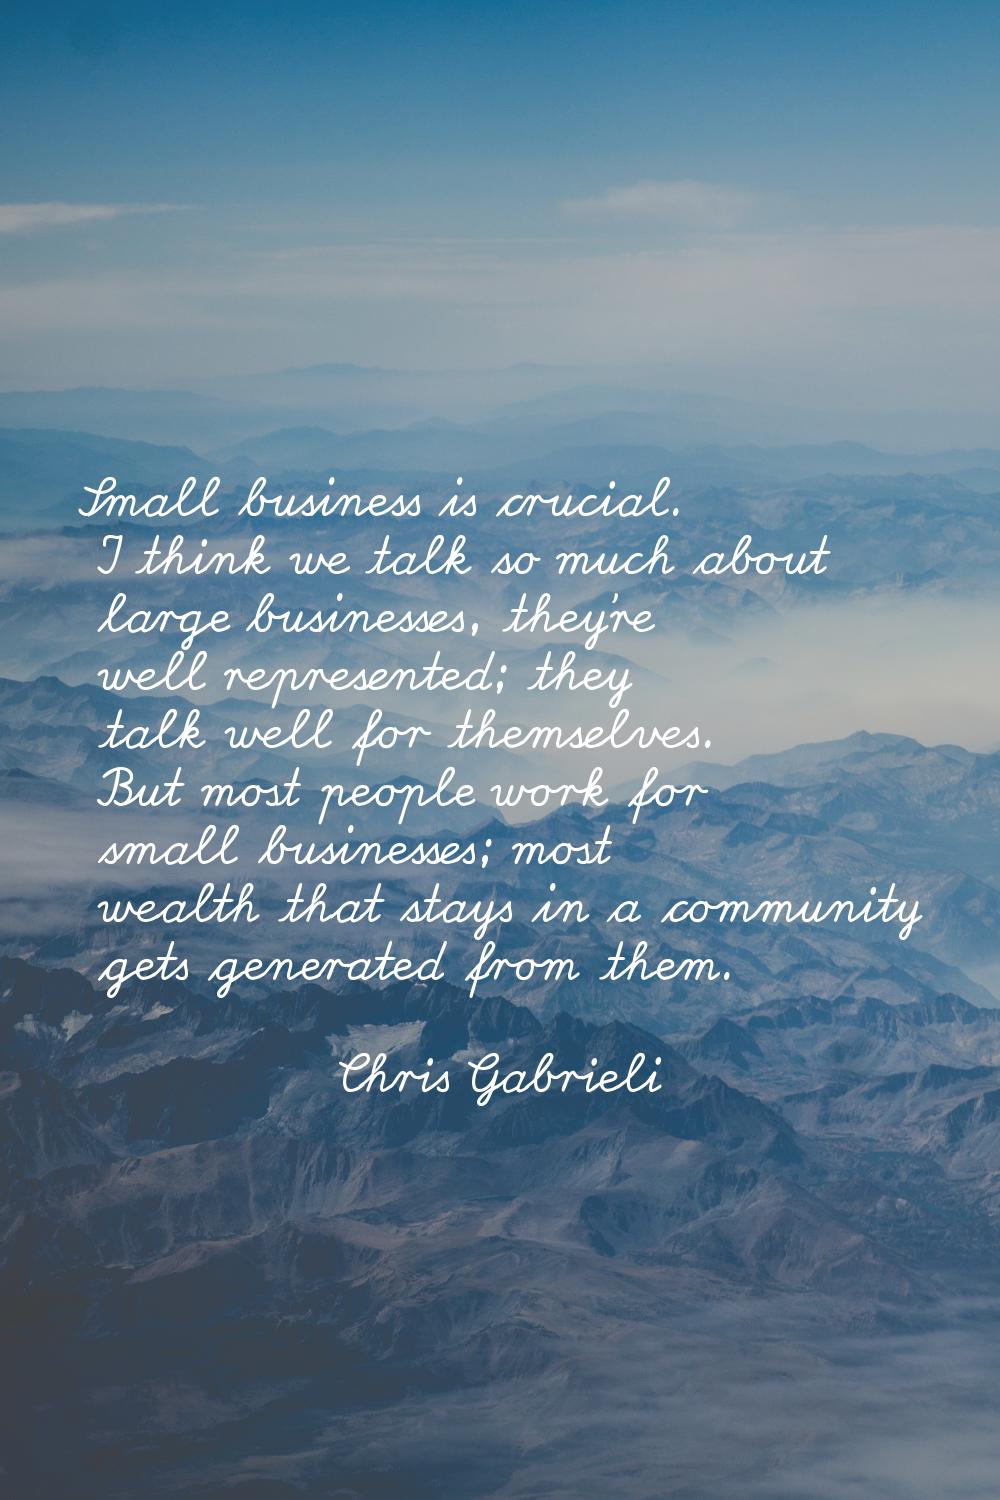 Small business is crucial. I think we talk so much about large businesses, they're well represented